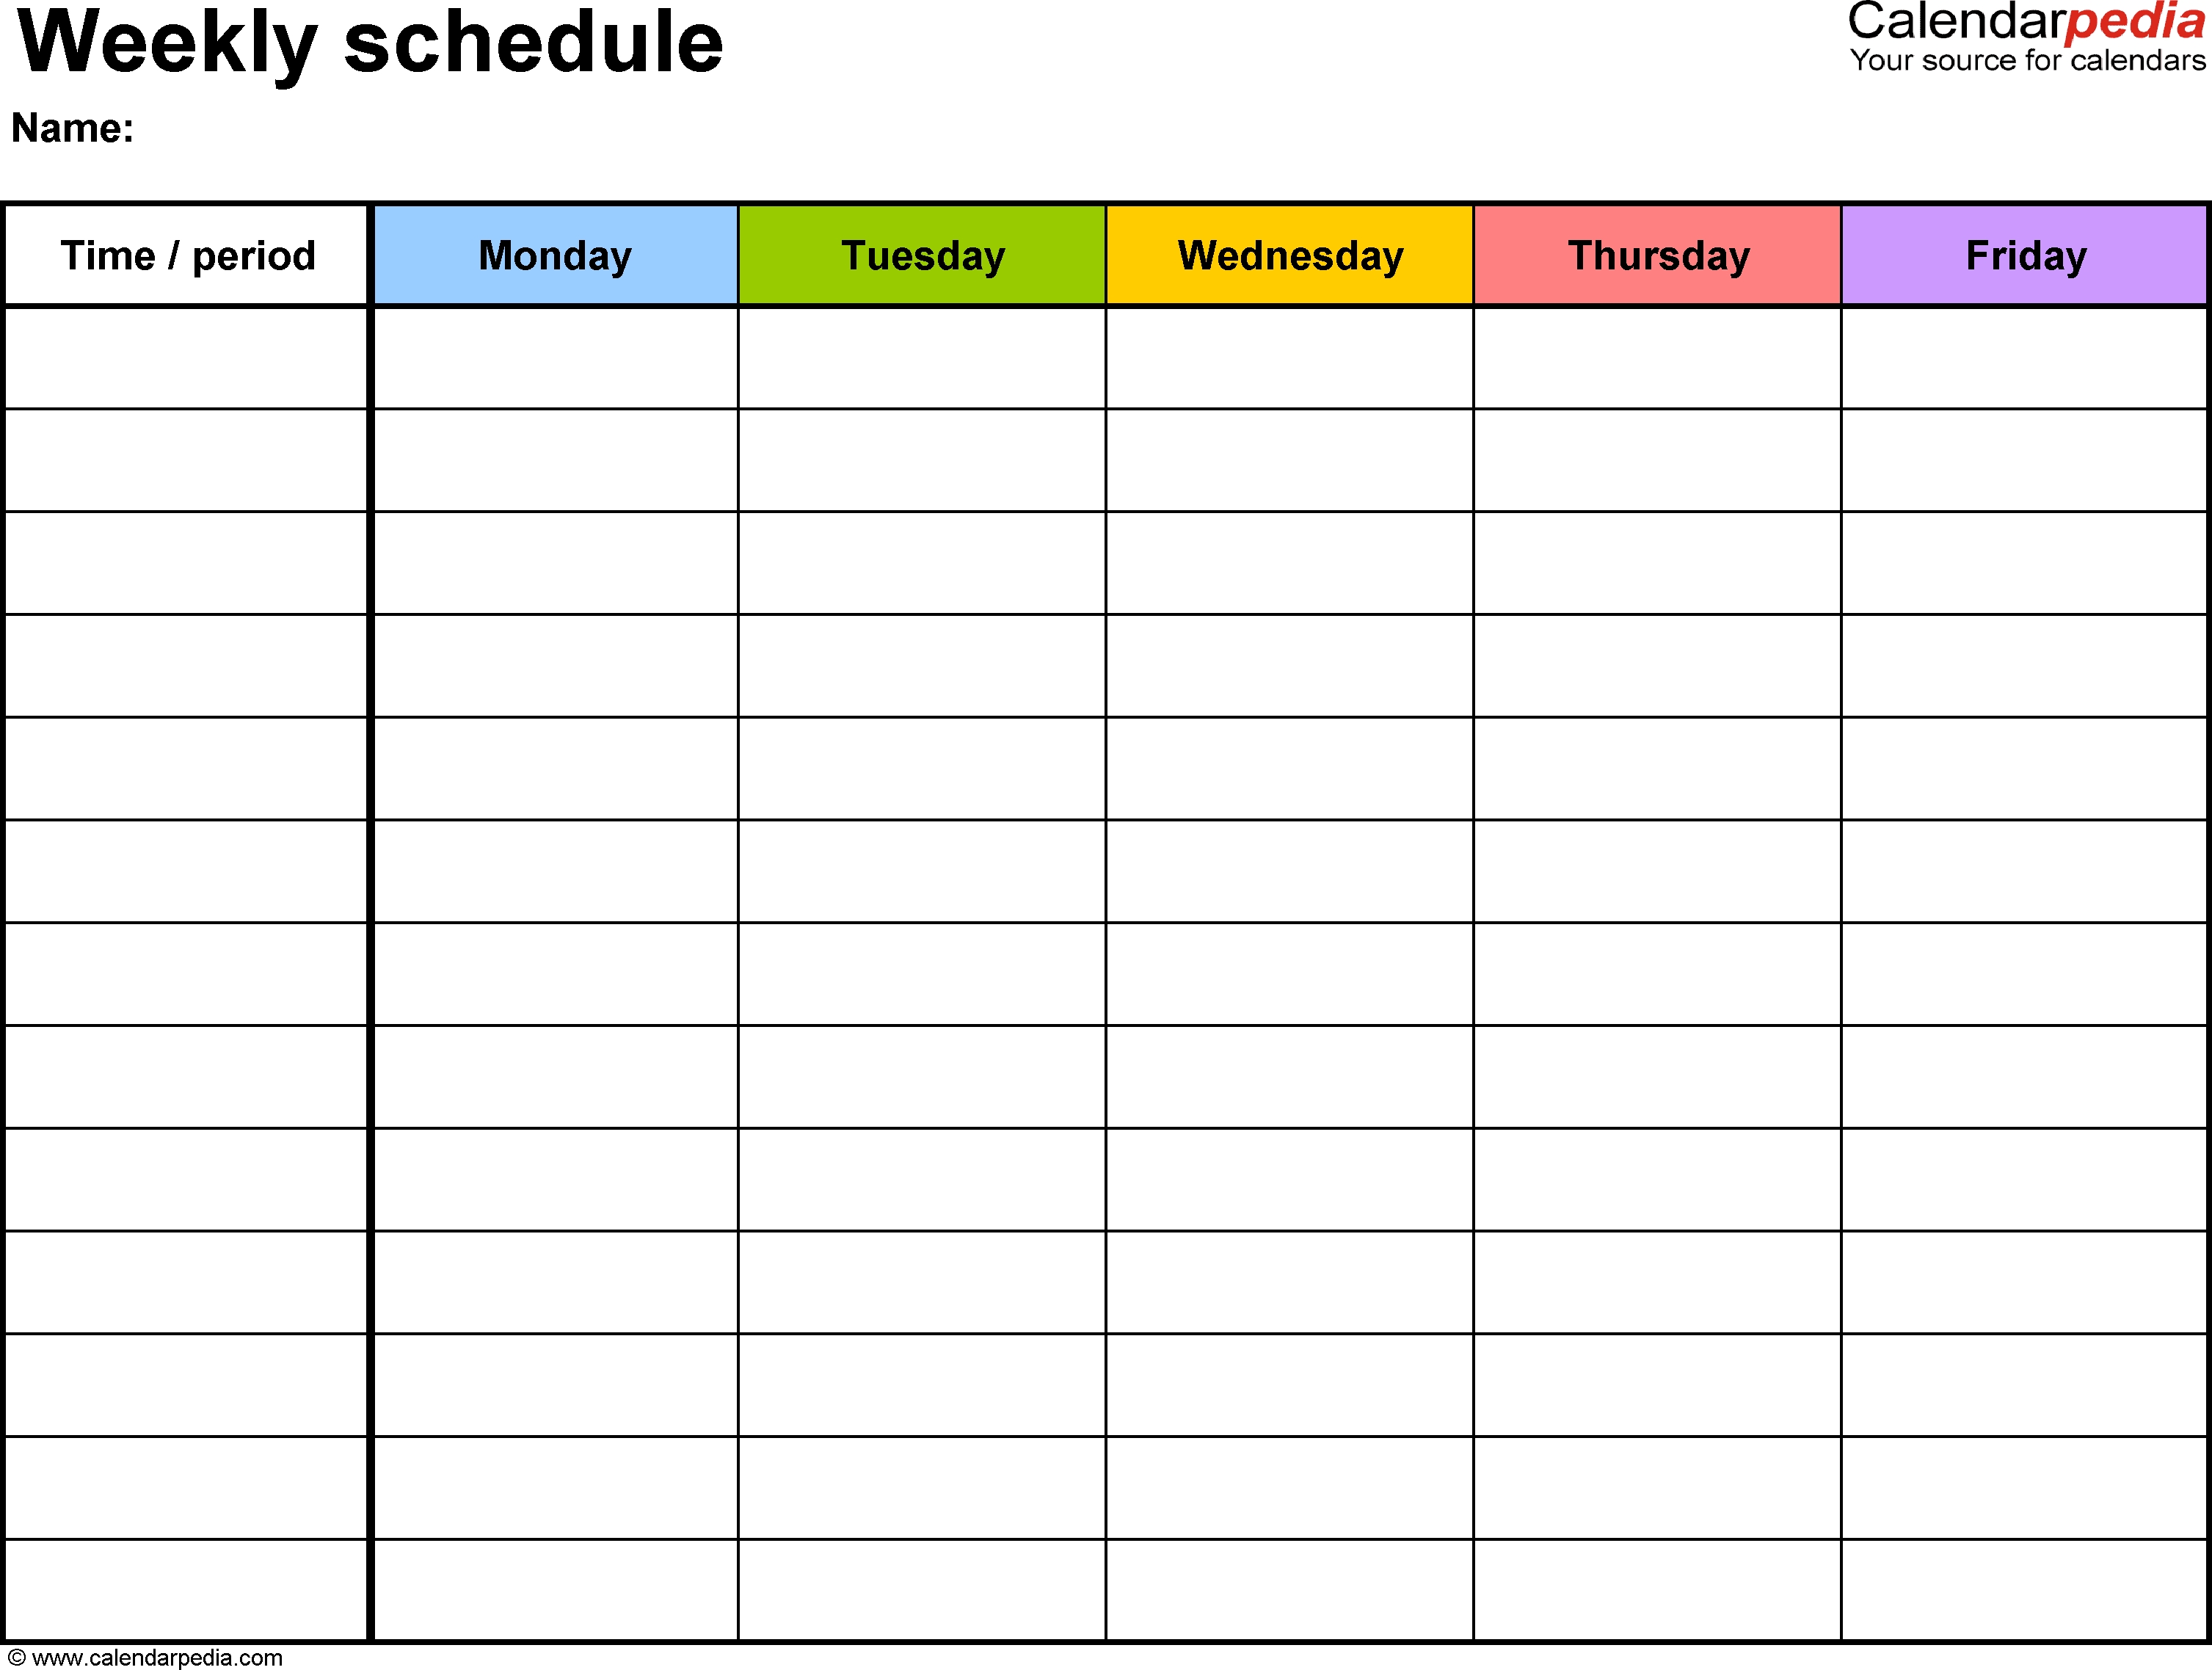 Free Weekly Schedule Templates For Excel - 18 Templates with 6 Weeks Holiday Timeline Template